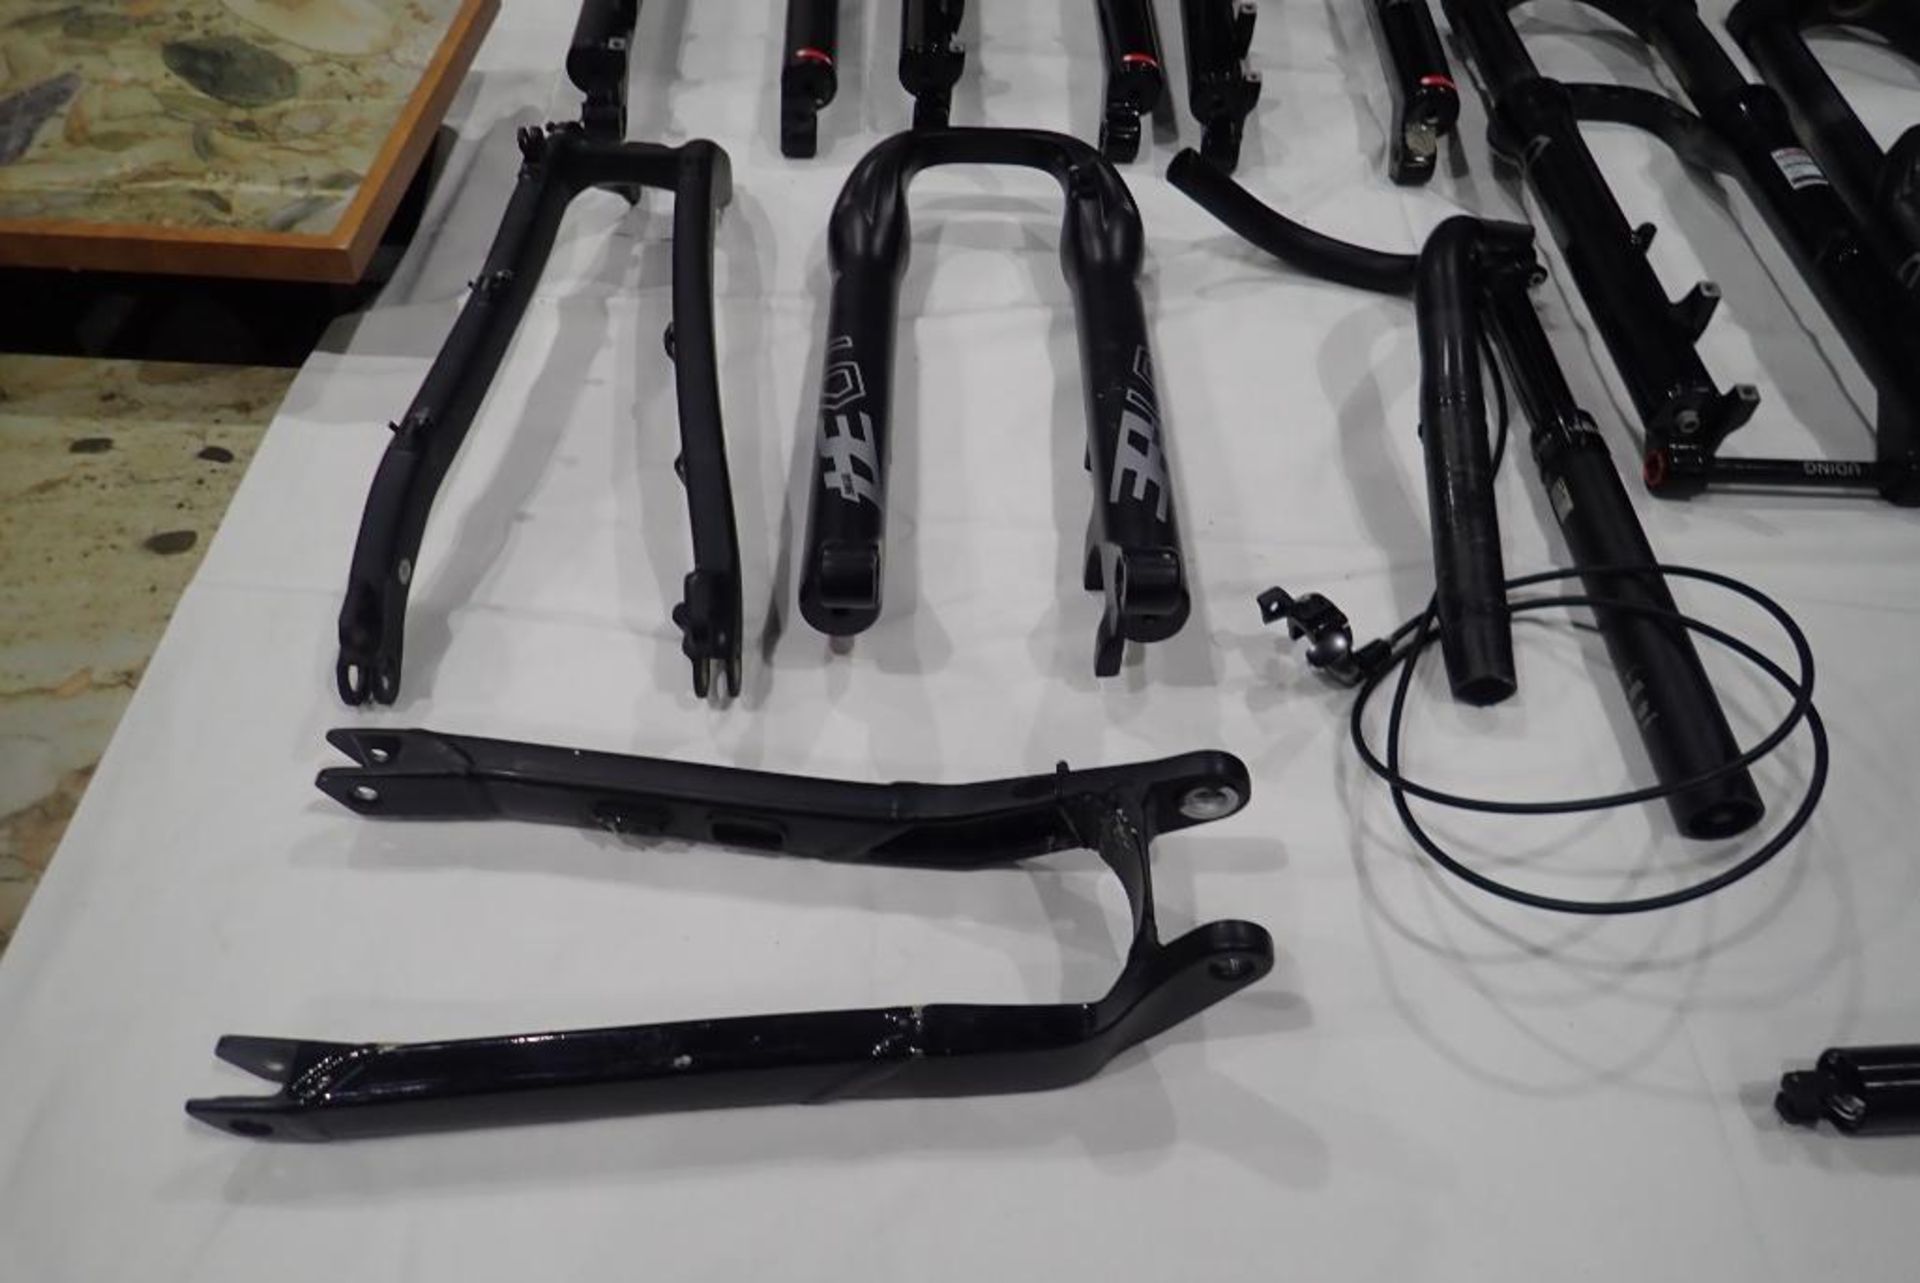 Lot of NEW AND USED Mountain Bike Fork Parts, etc. - Image 4 of 4